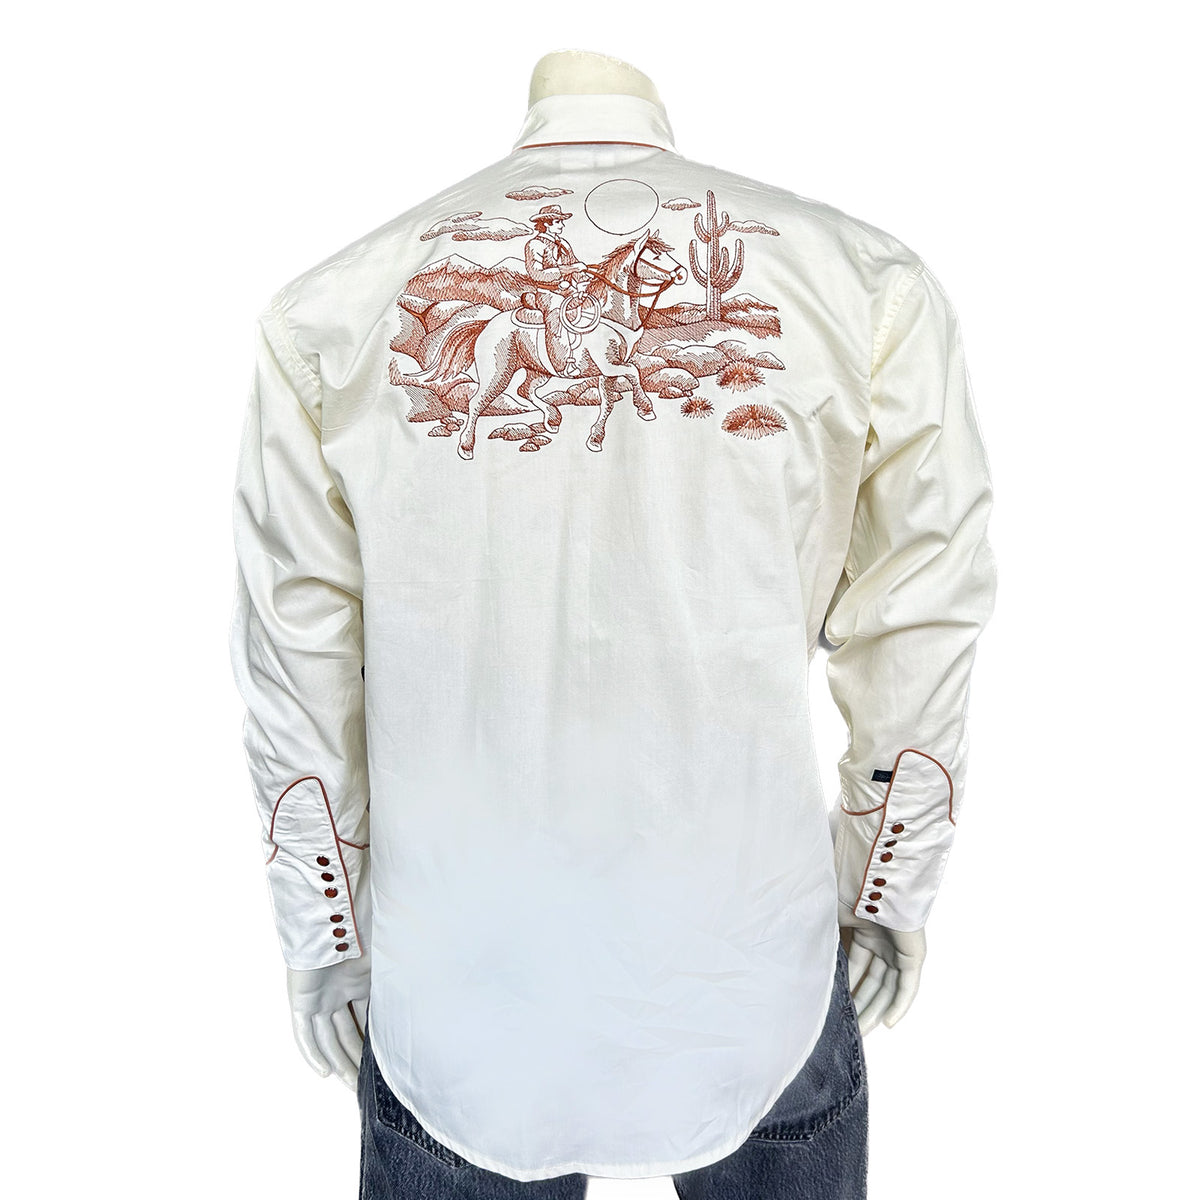 Men's Ivory Vintage Rider Western Embroidery